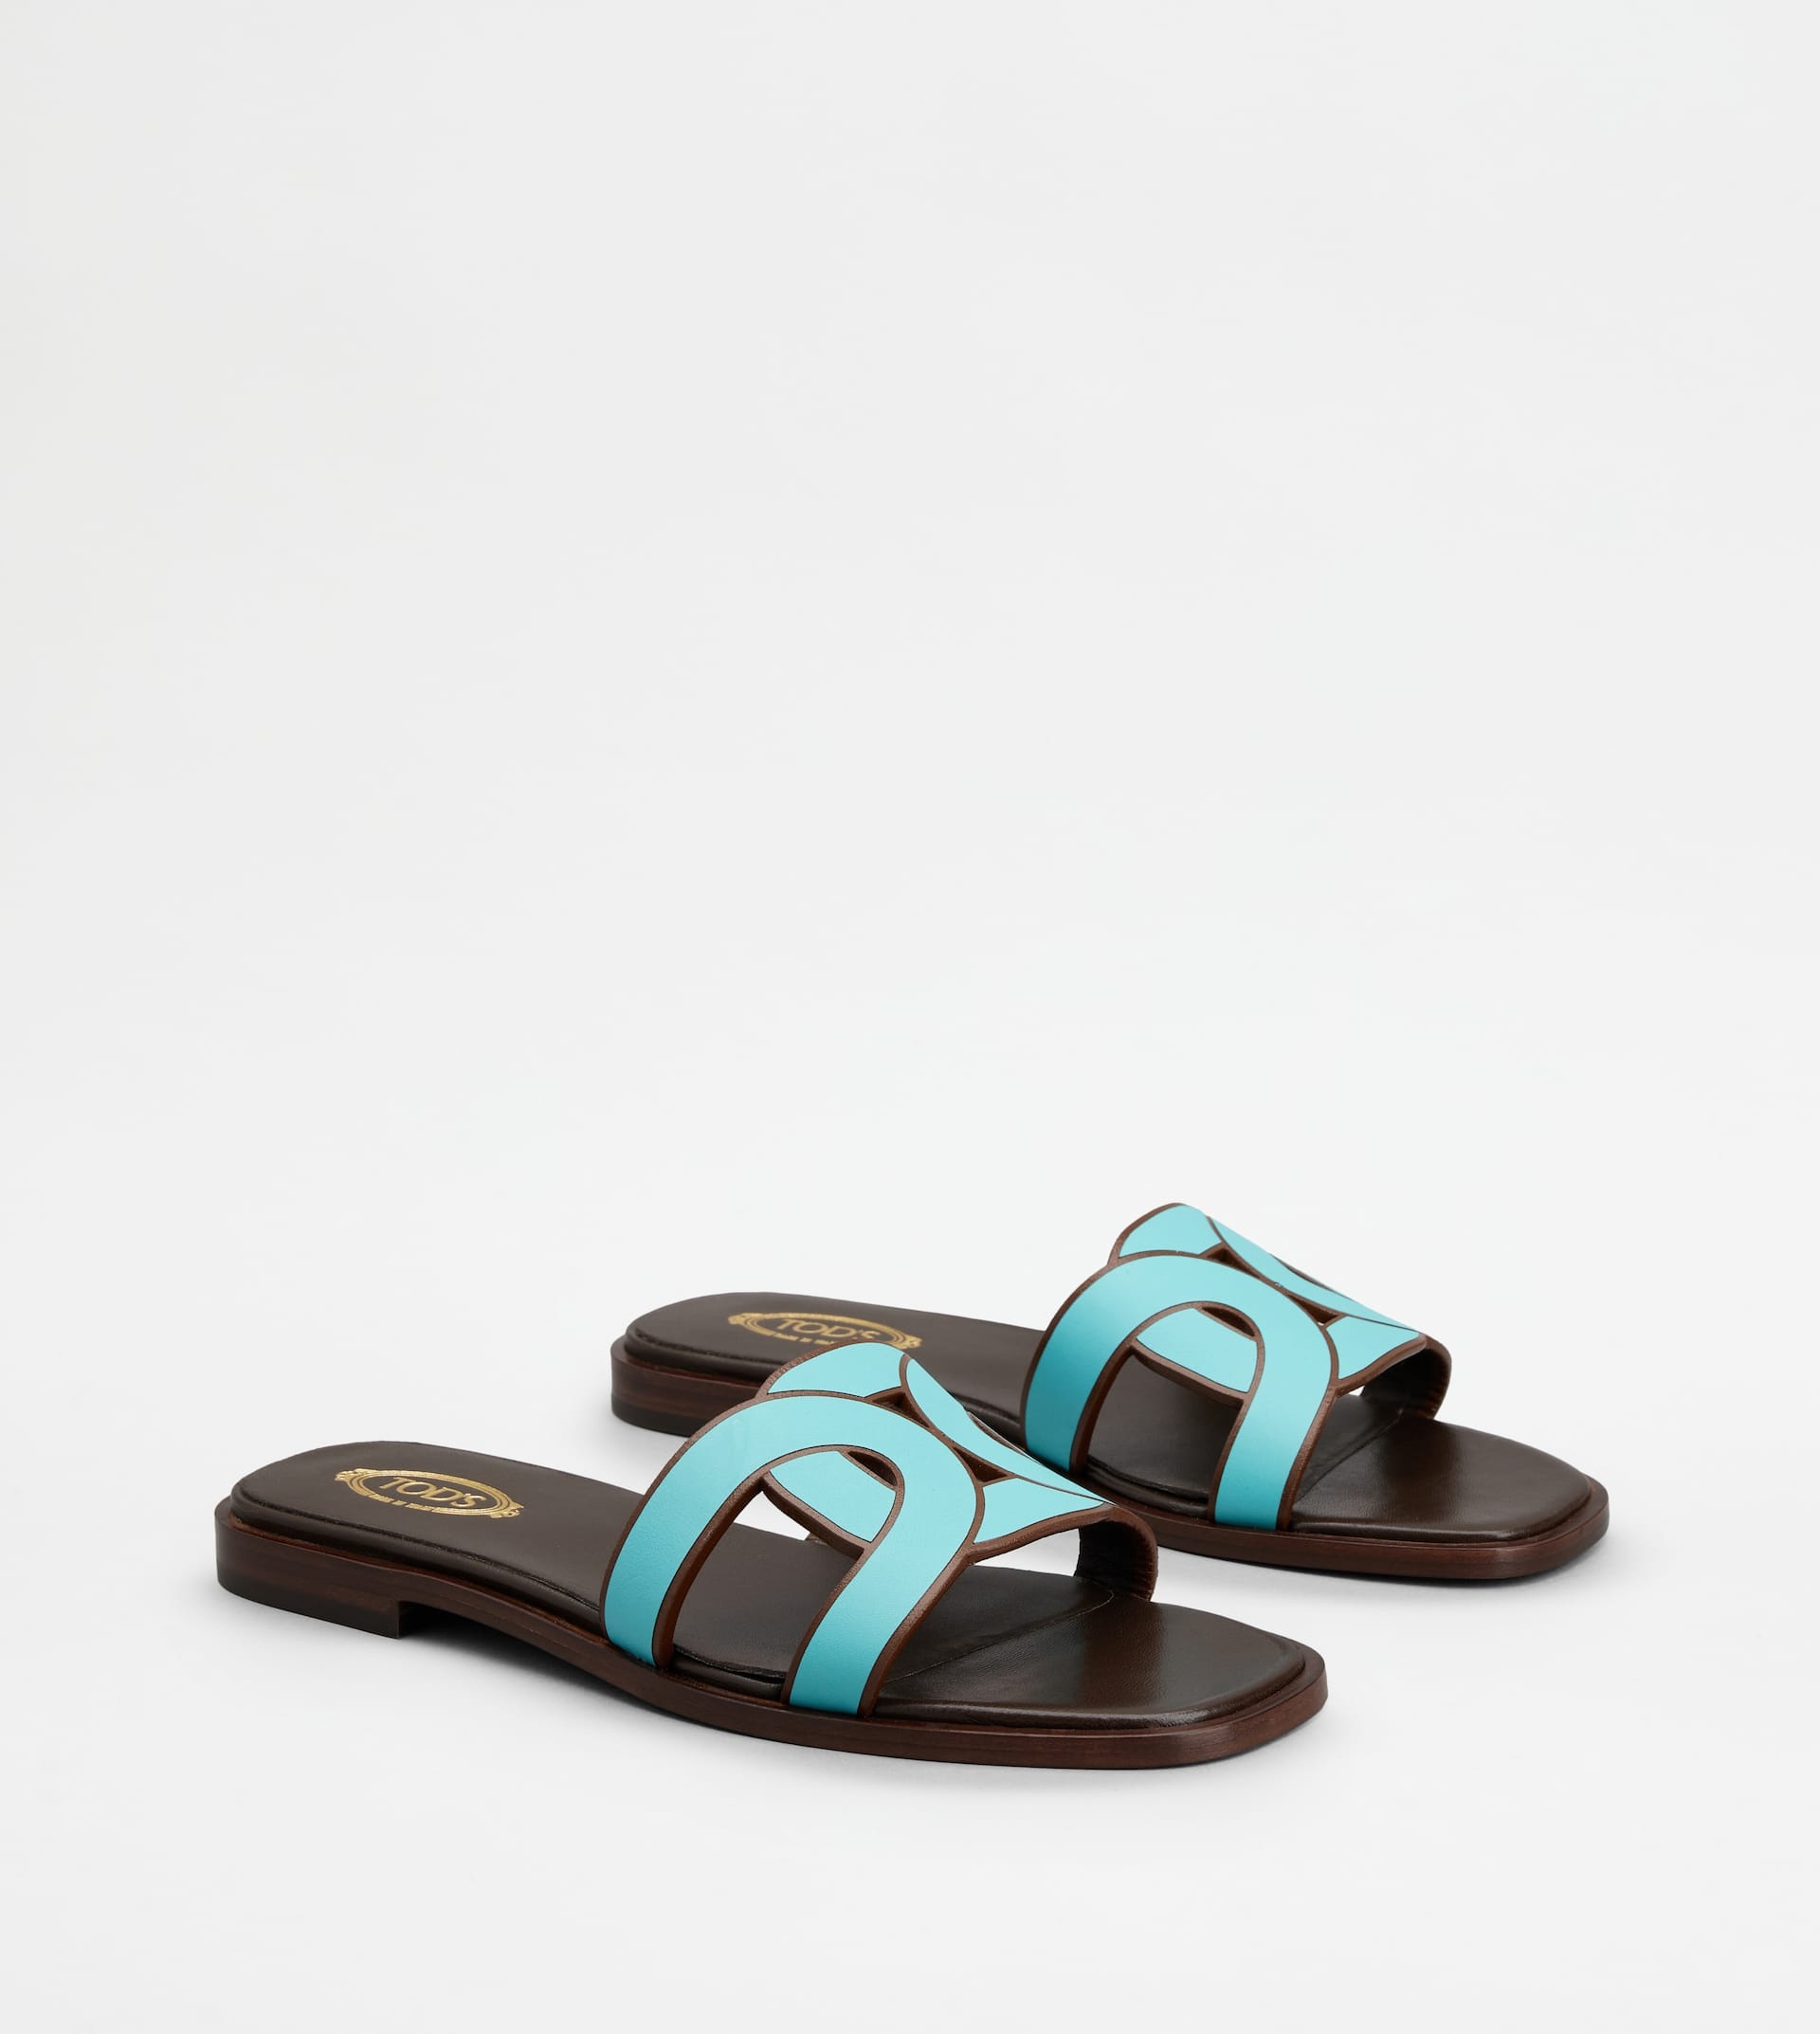 SANDALS IN LEATHER - LIGHT BLUE - 3